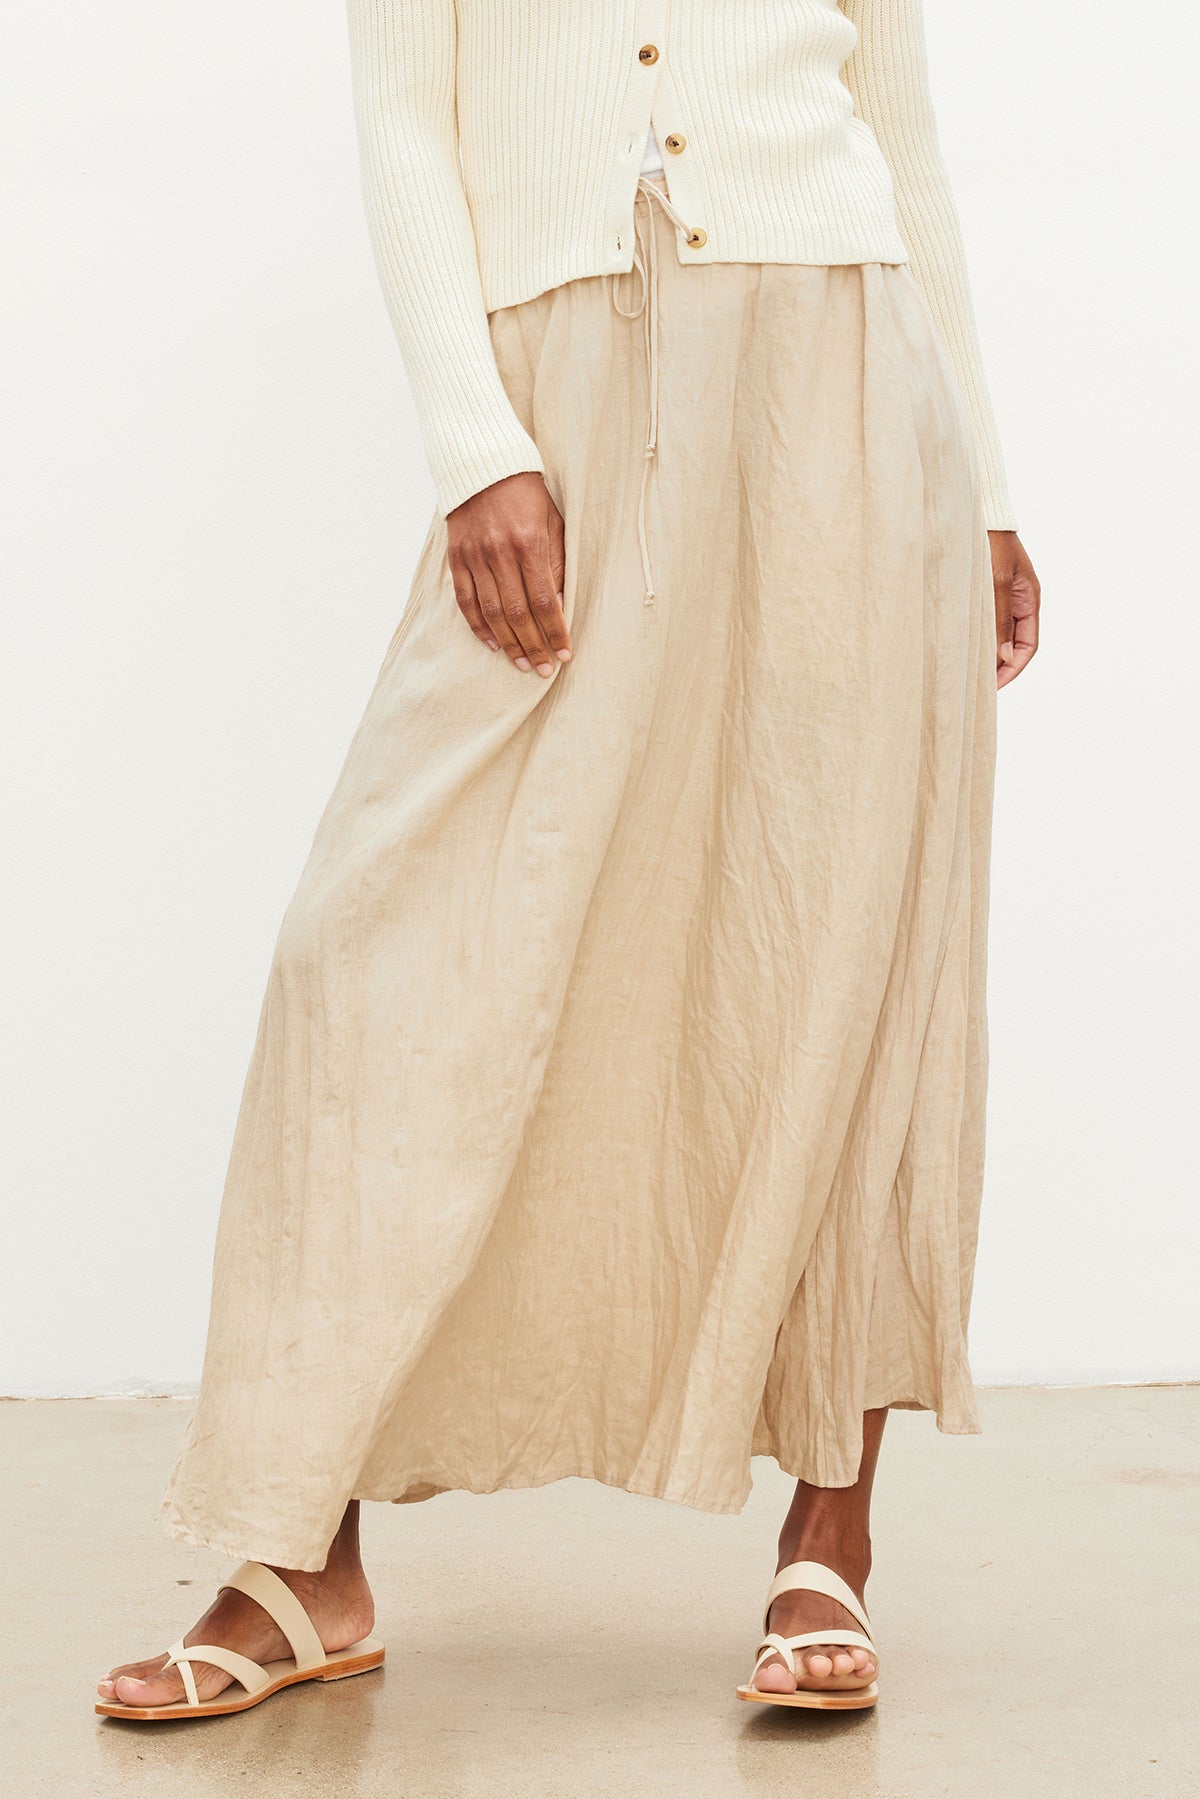 The model is wearing a Velvet by Graham & Spencer BAILEY LINEN MAXI SKIRT with an elastic drawstring waist and white sweater.-35955424133313